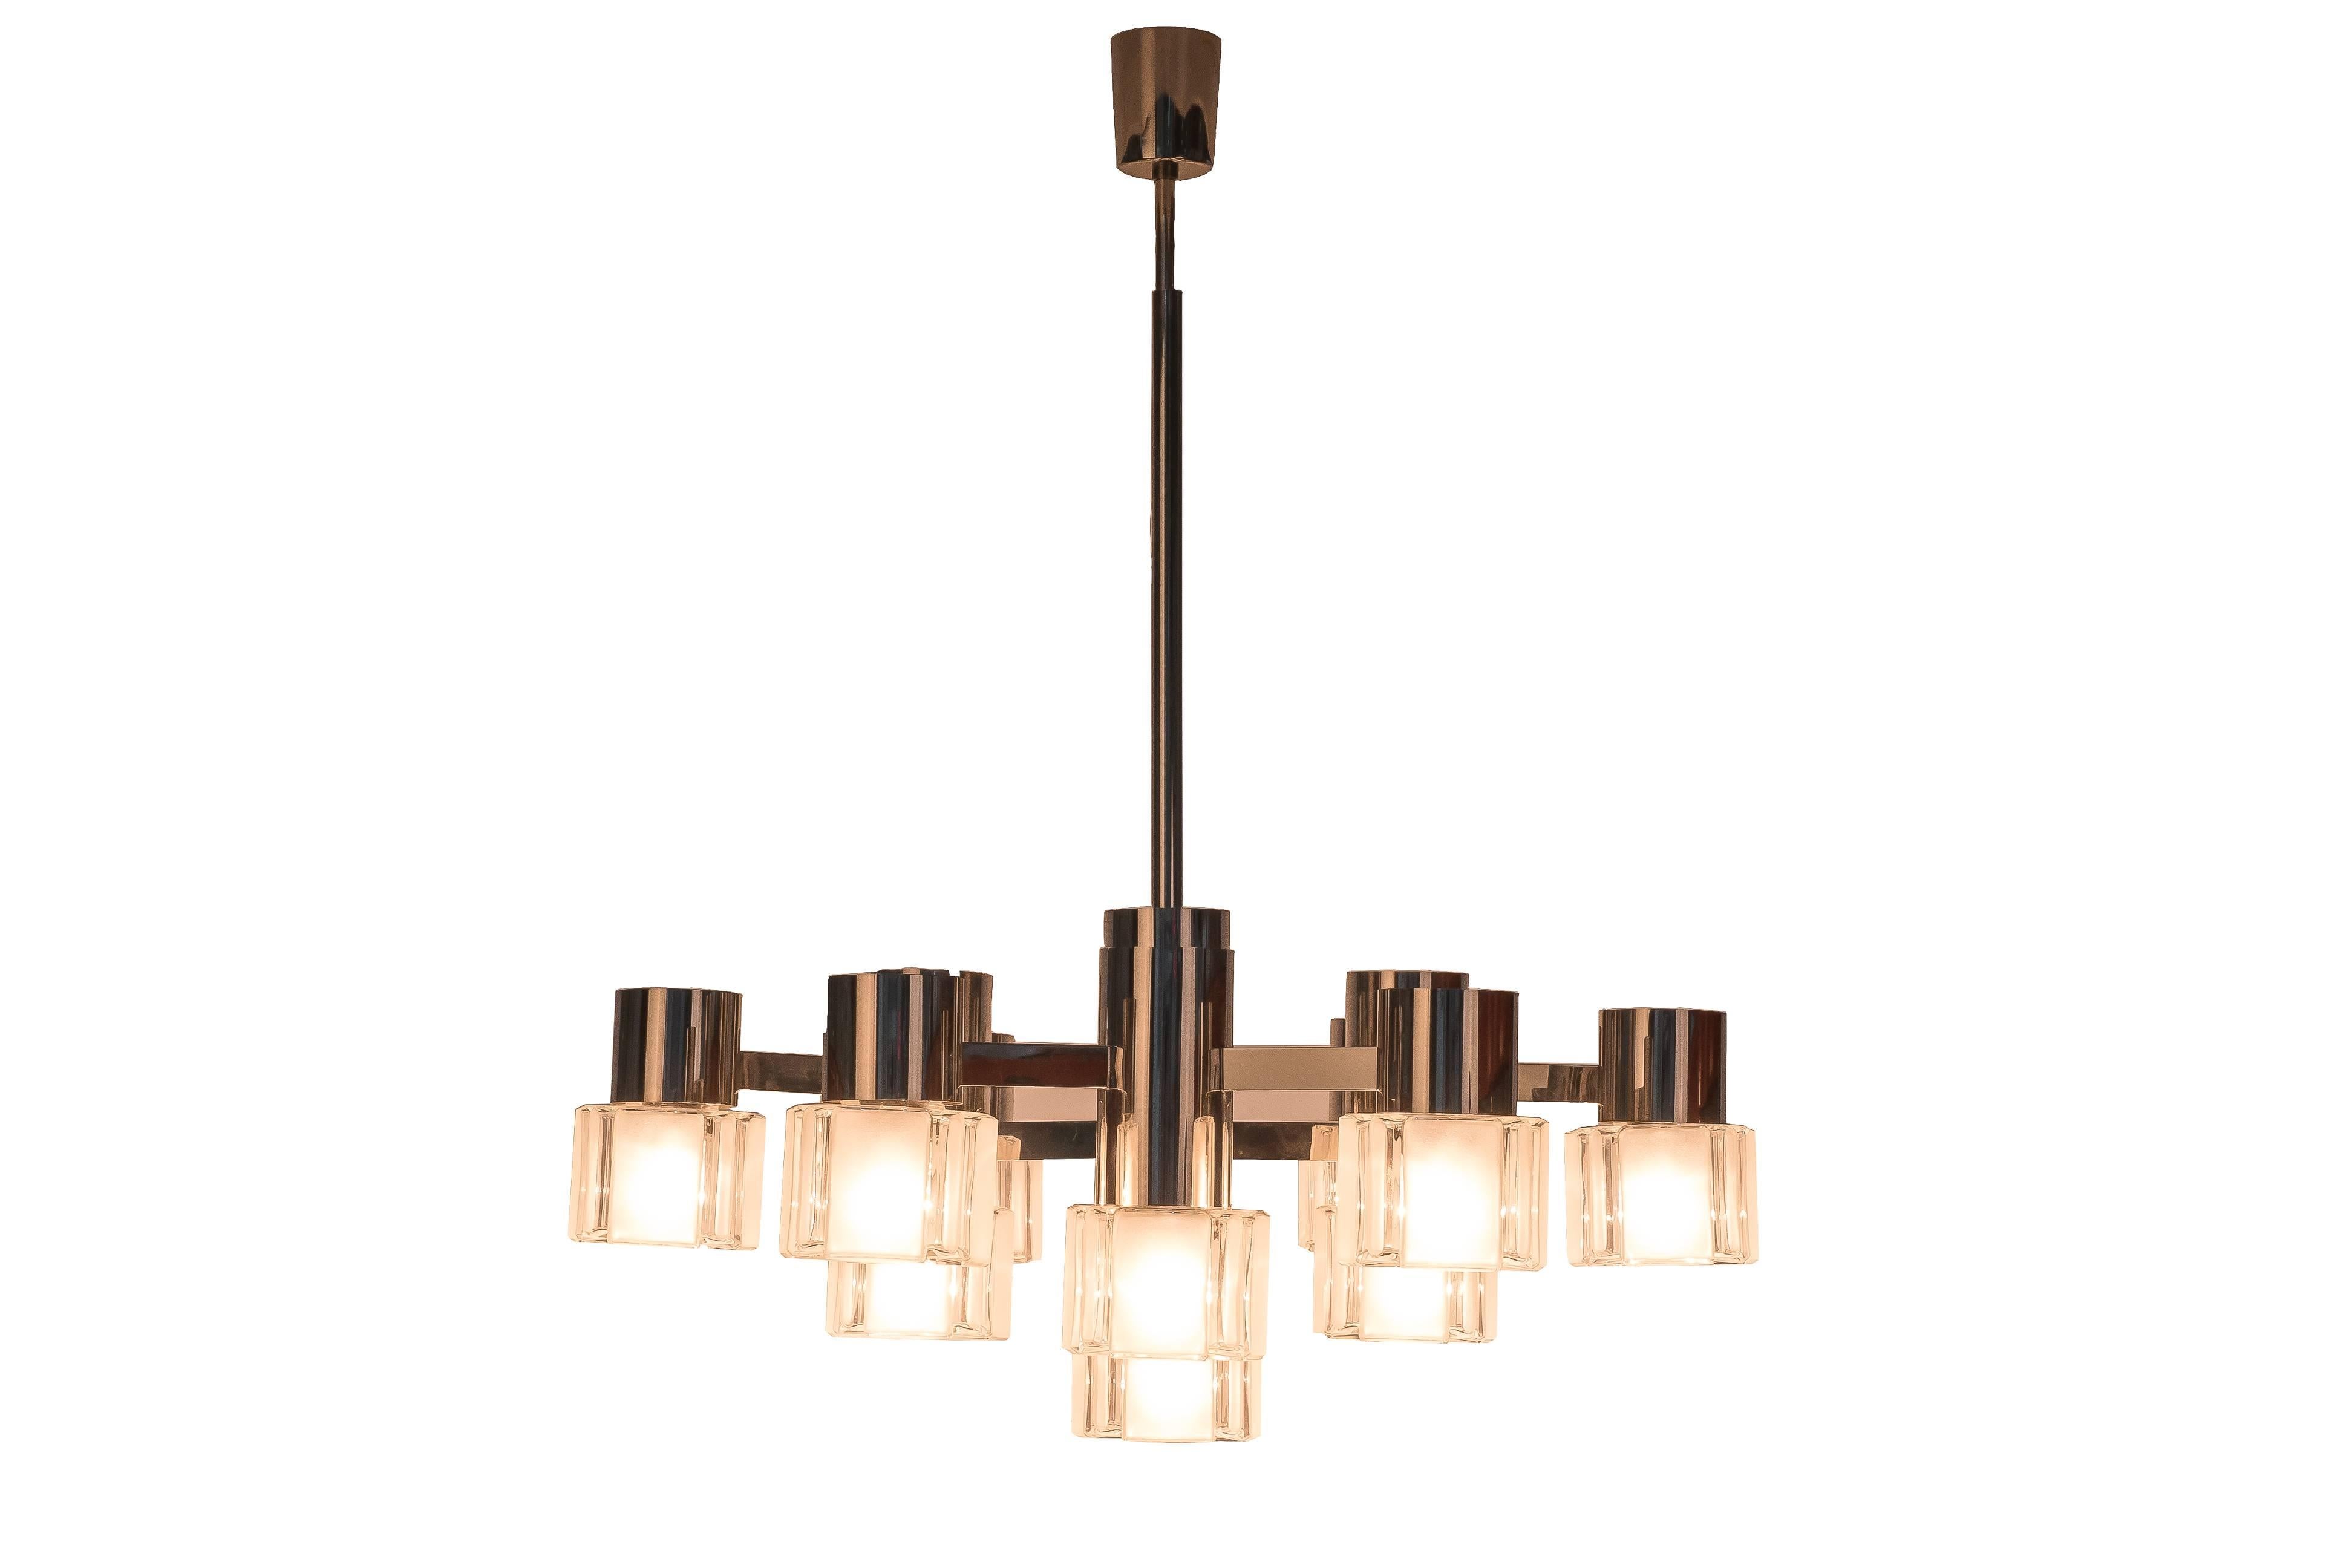 This luxe Mid-Century cubist chandelier was designed by Sciolari. It features a chromed brass frame that holds ten glass cube shades with frosted design.

Made in Italy, circa 1960

Measures: 30